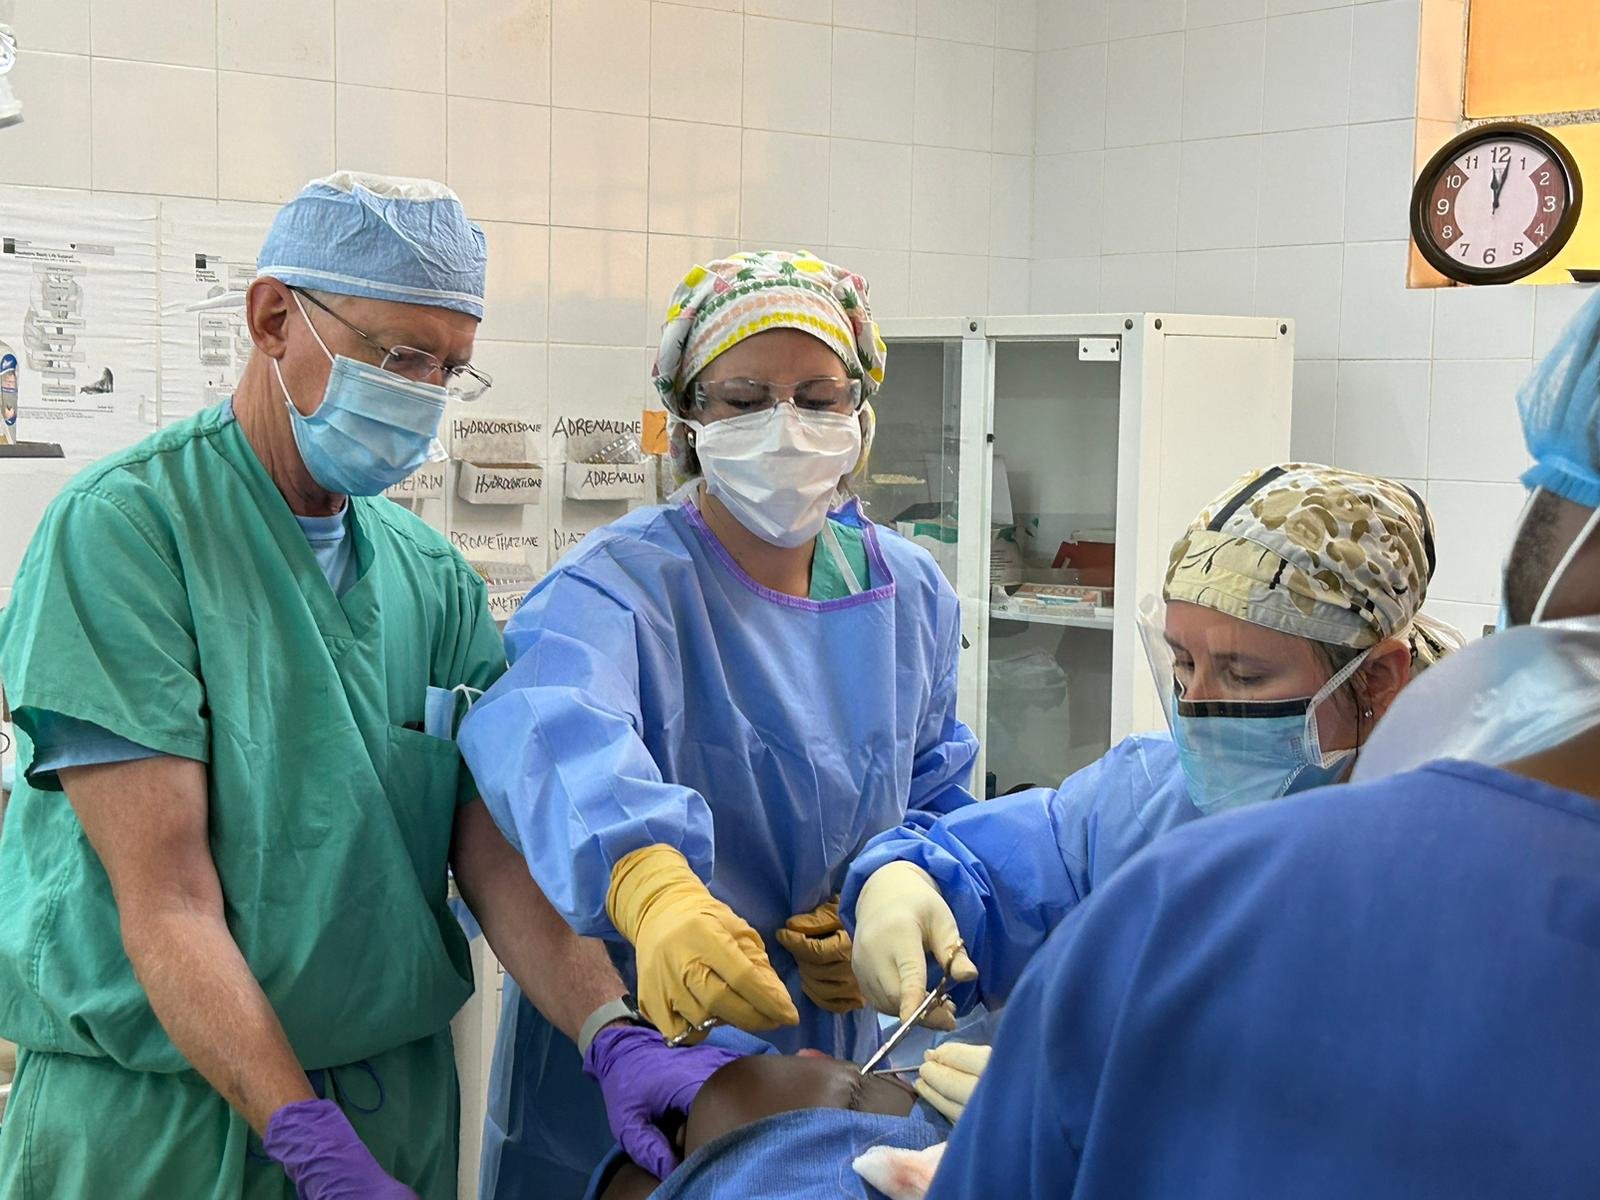 Ari, center, assists Dr. Roeder during a case.